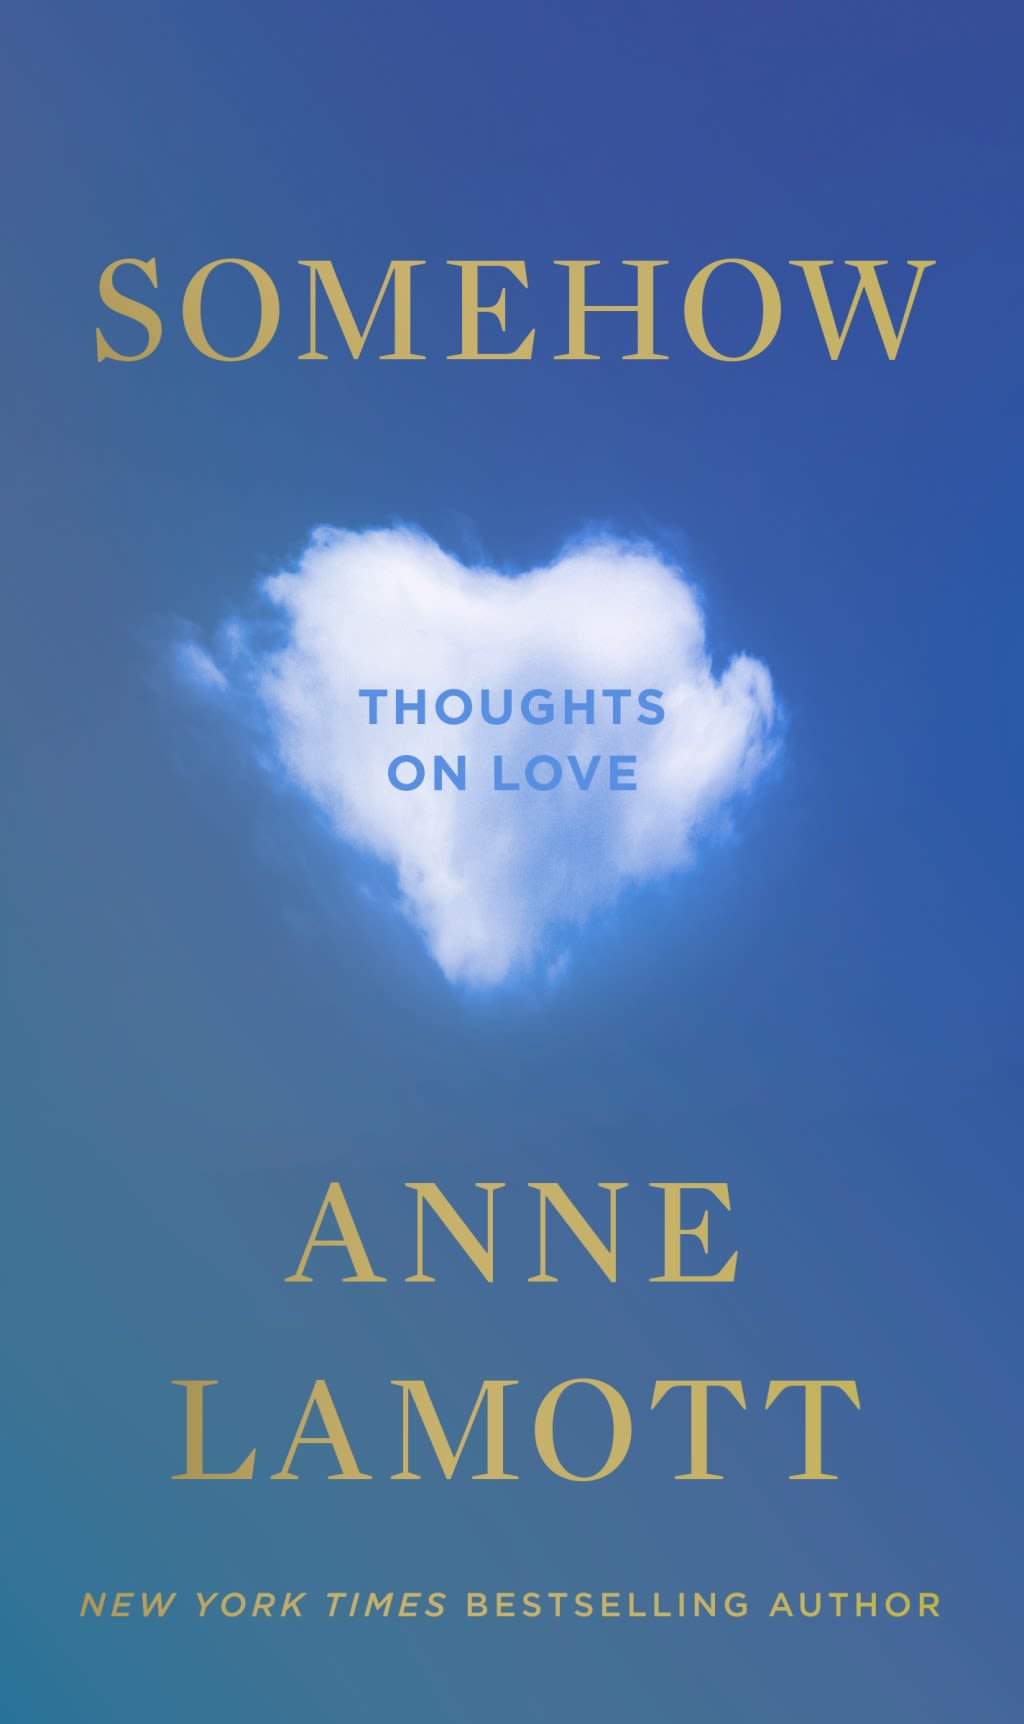 Anne Lamott leads bestsellers as nonfiction pops with new books